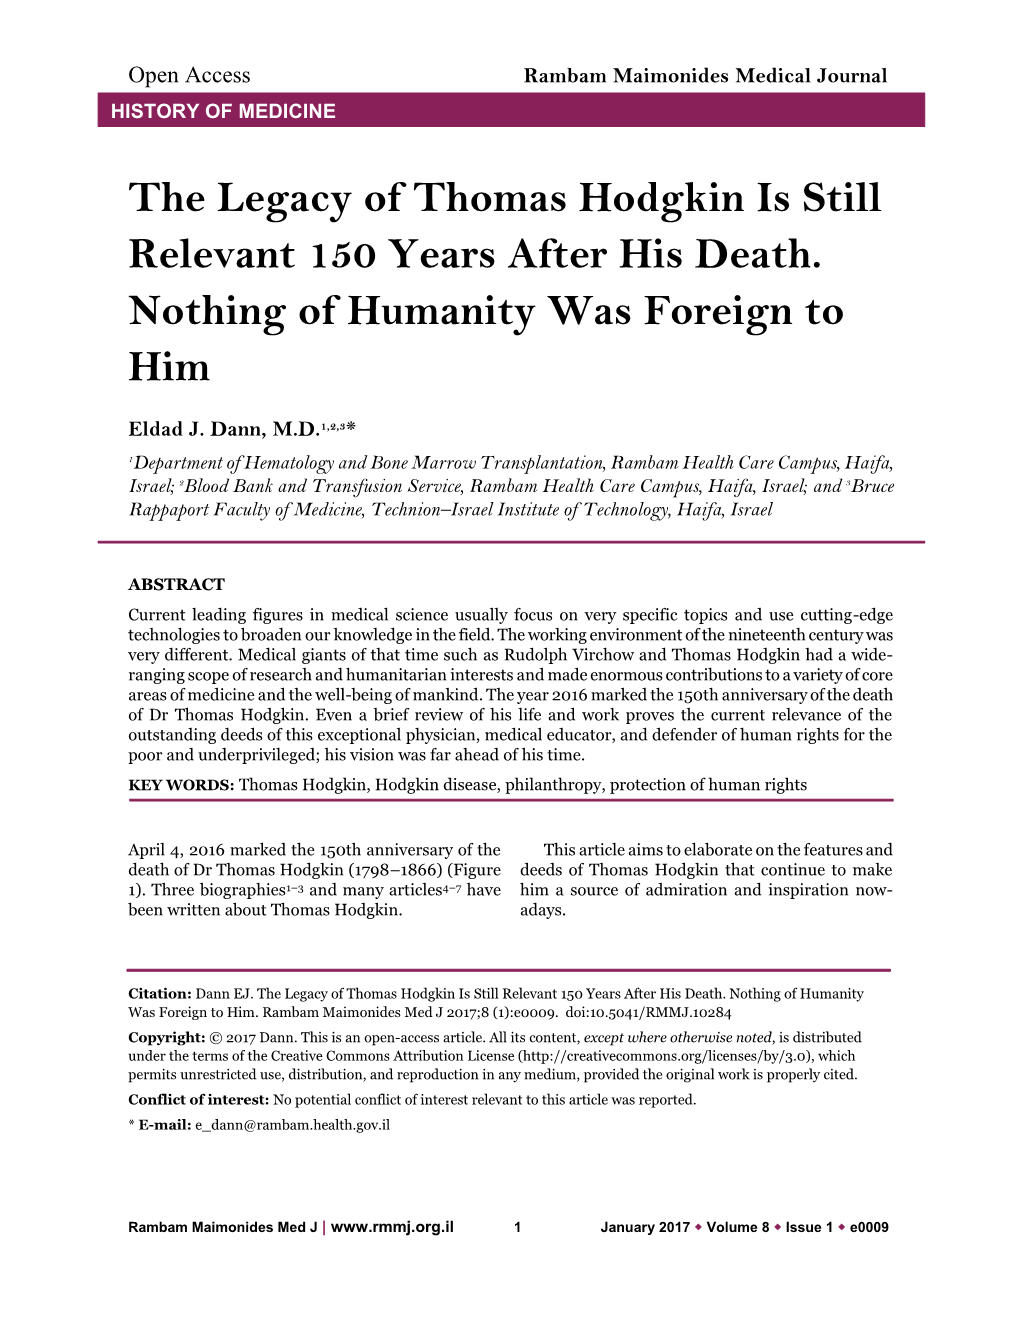 The Legacy of Thomas Hodgkin Is Still Relevant 150 Years After His Death